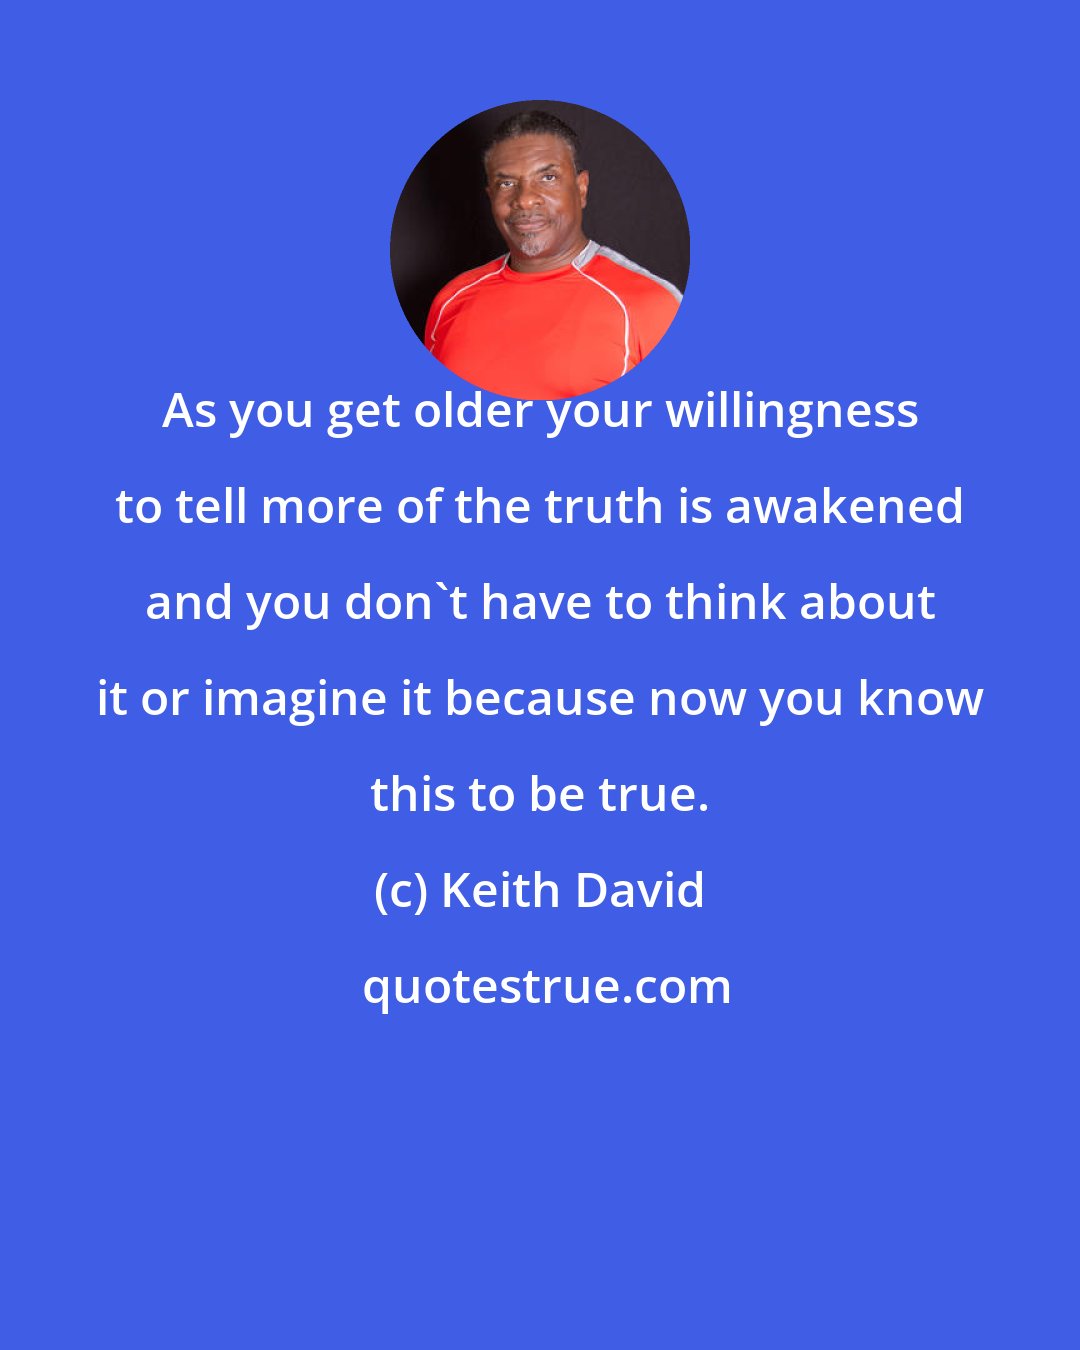 Keith David: As you get older your willingness to tell more of the truth is awakened and you don't have to think about it or imagine it because now you know this to be true.